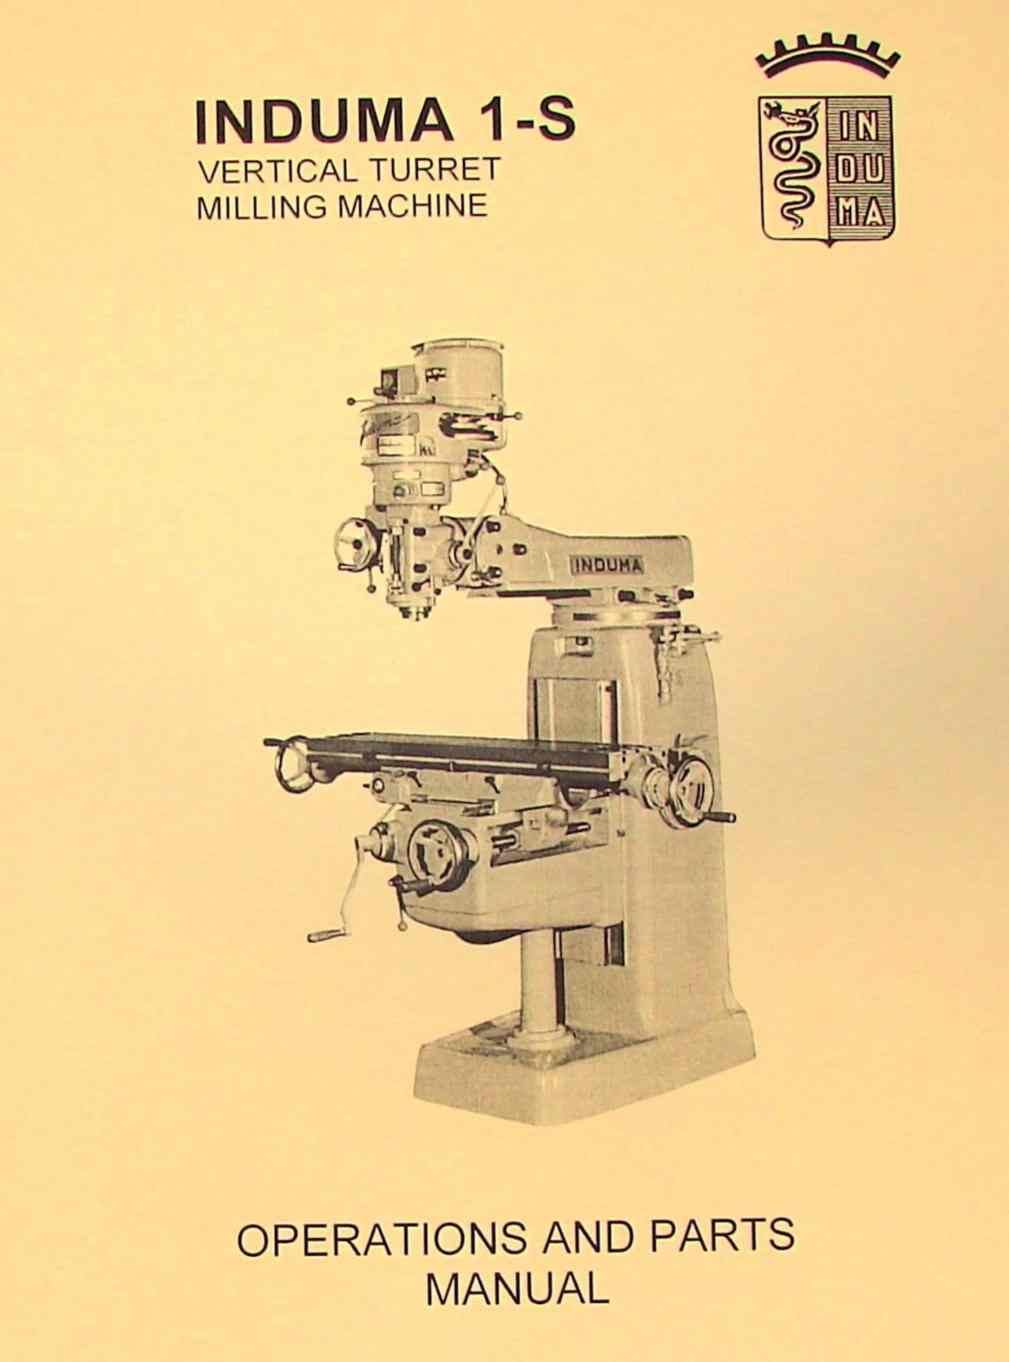 Vertical Turret Milling Induma 1-S Operations and Parts Lists Manual 1973 